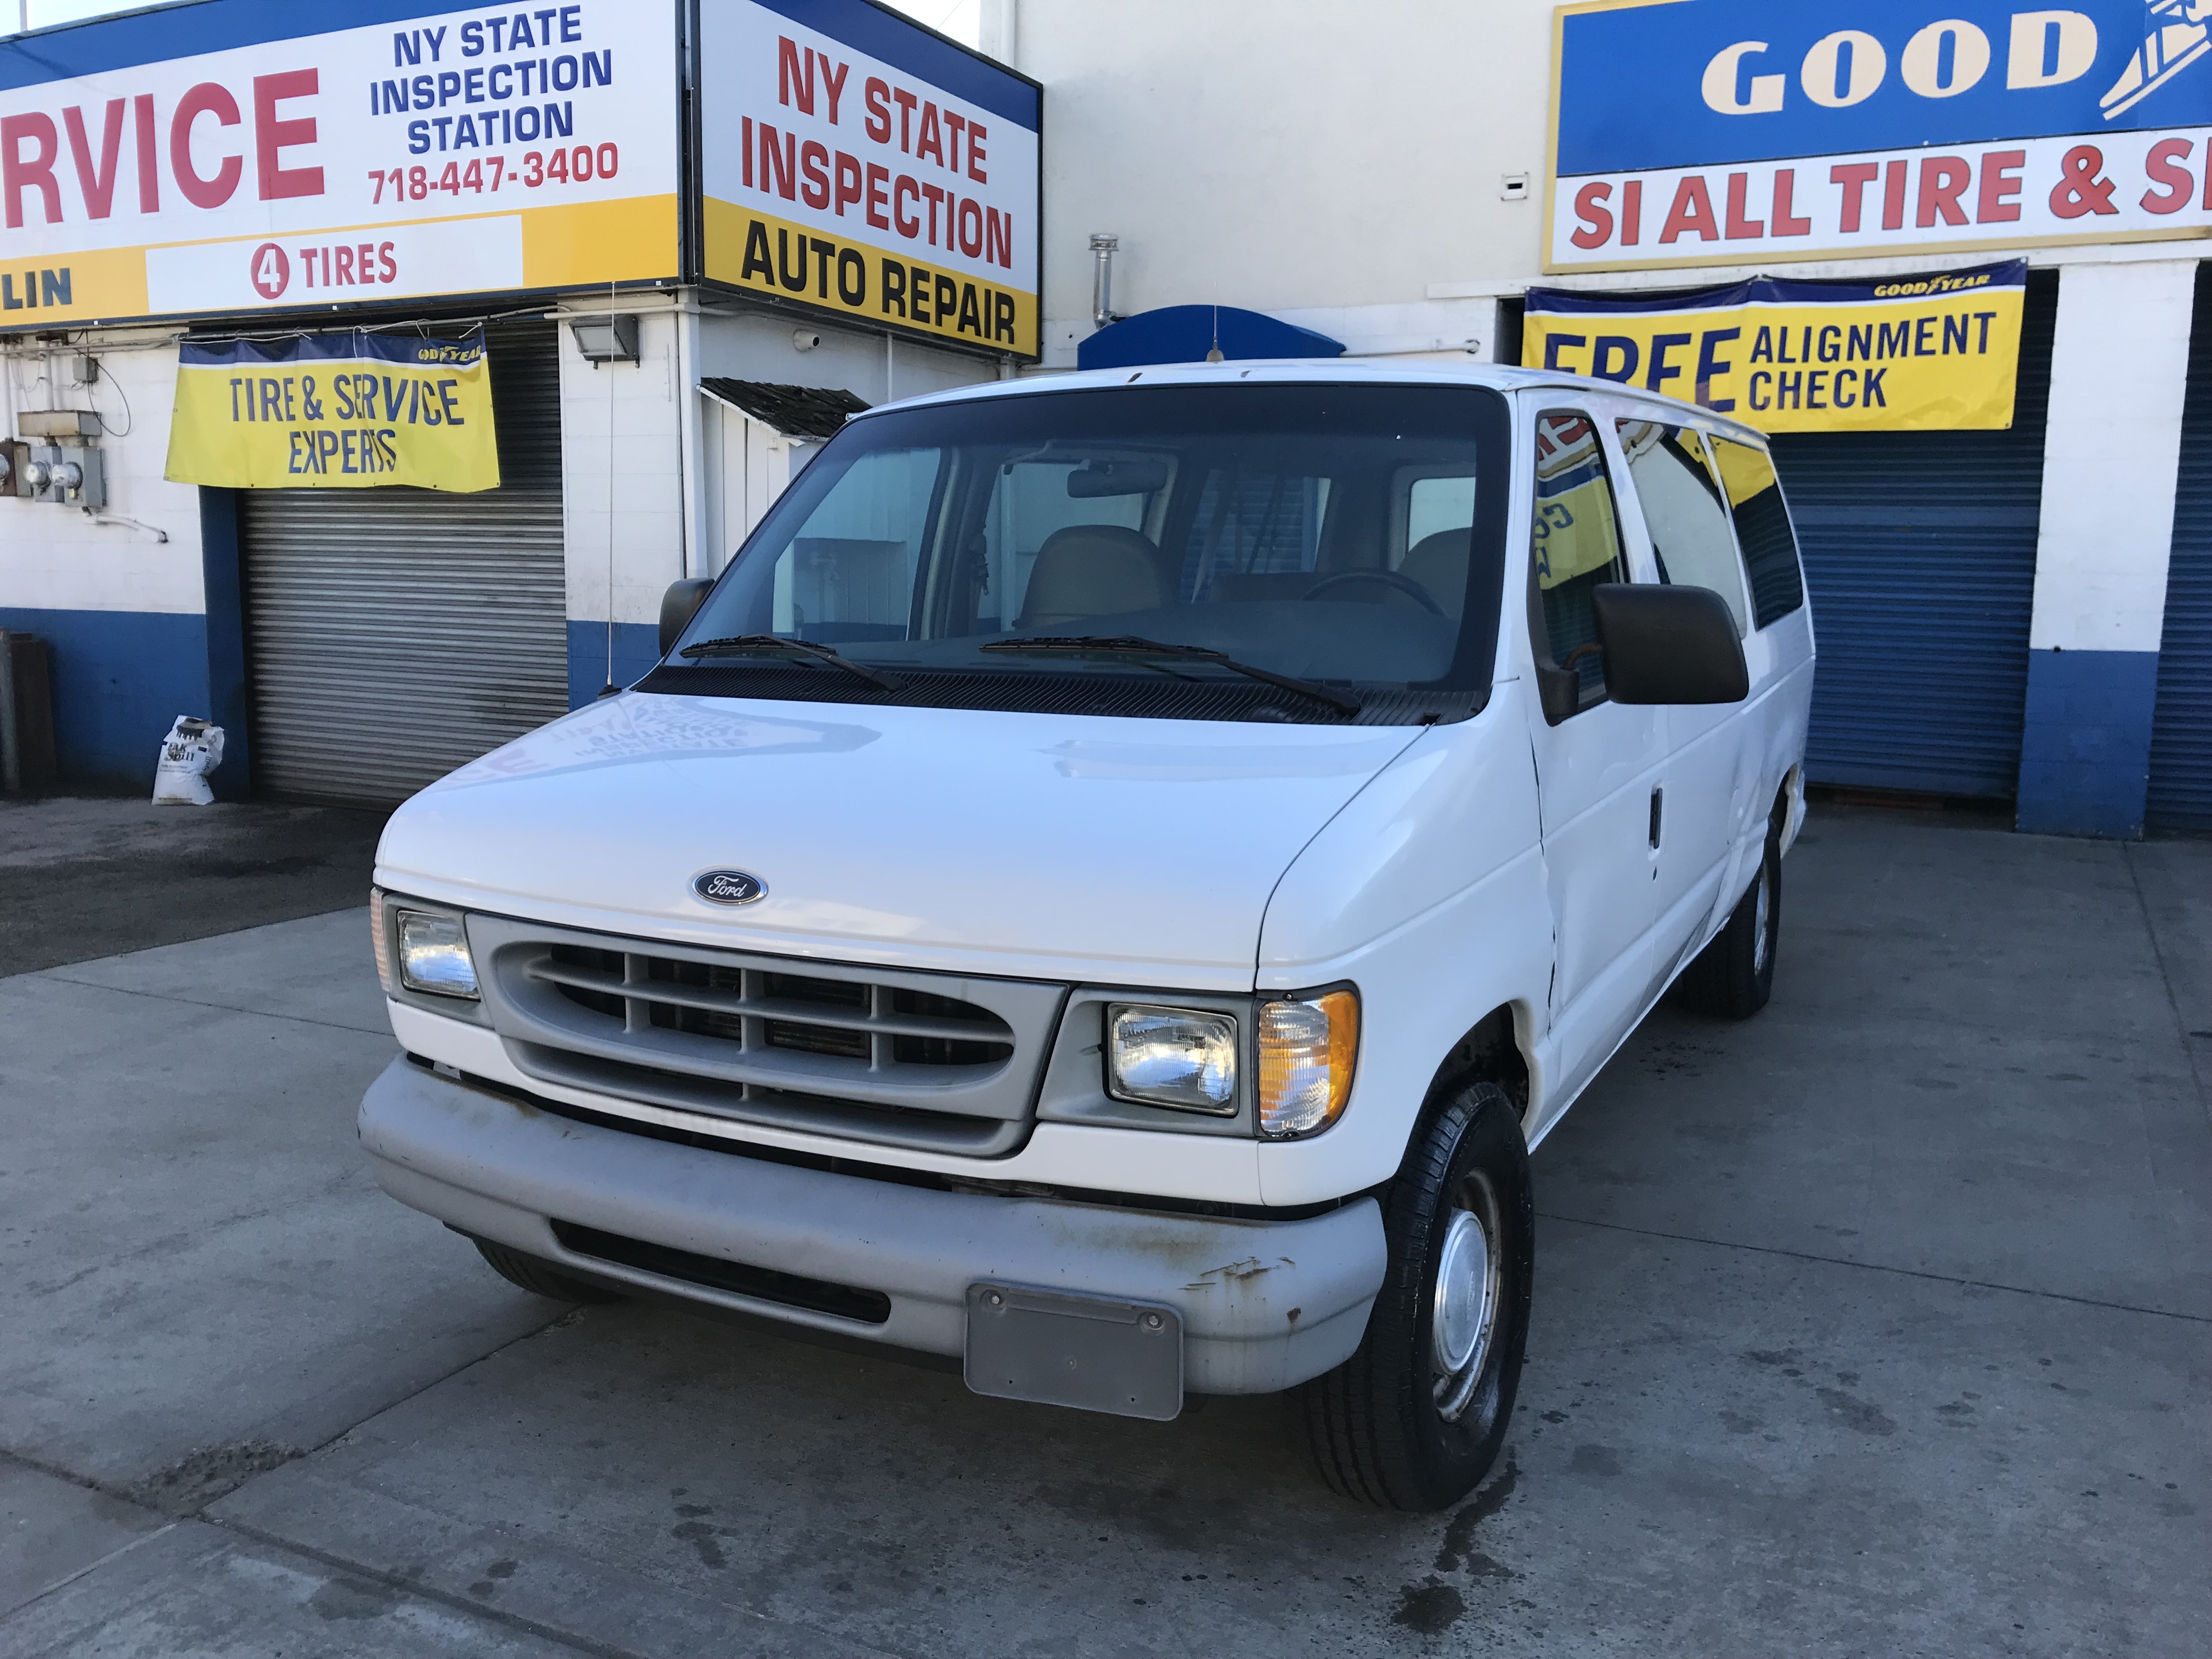 Used Car - 1999 Ford E-150 Econoline XL for Sale in Staten Island, NY